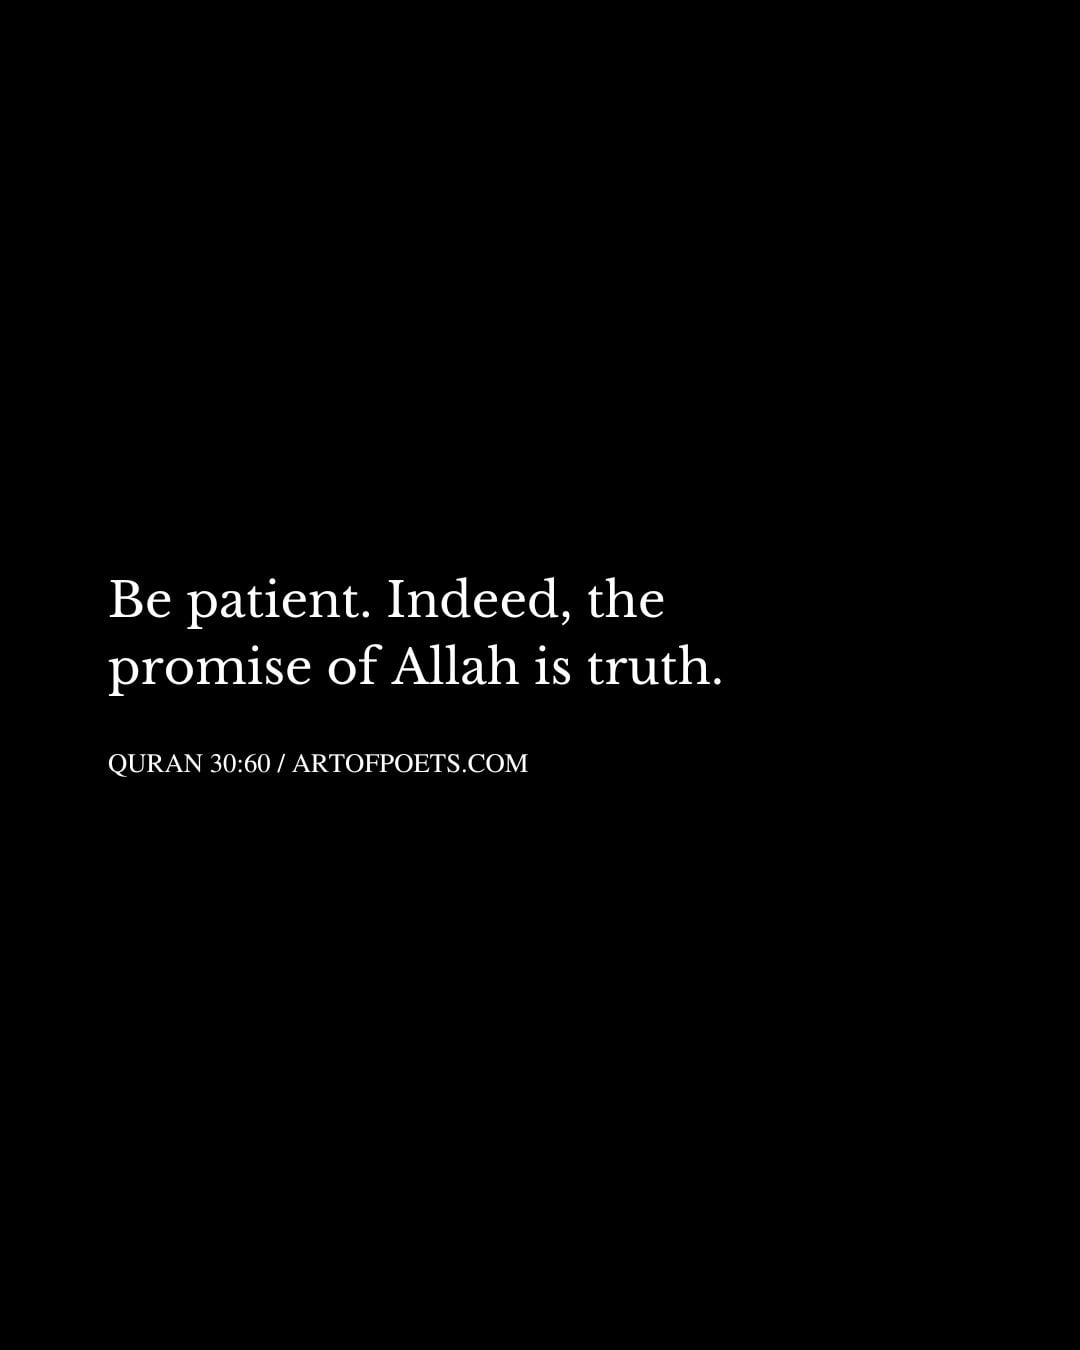 Be patient. Indeed the promise of Allah is truth